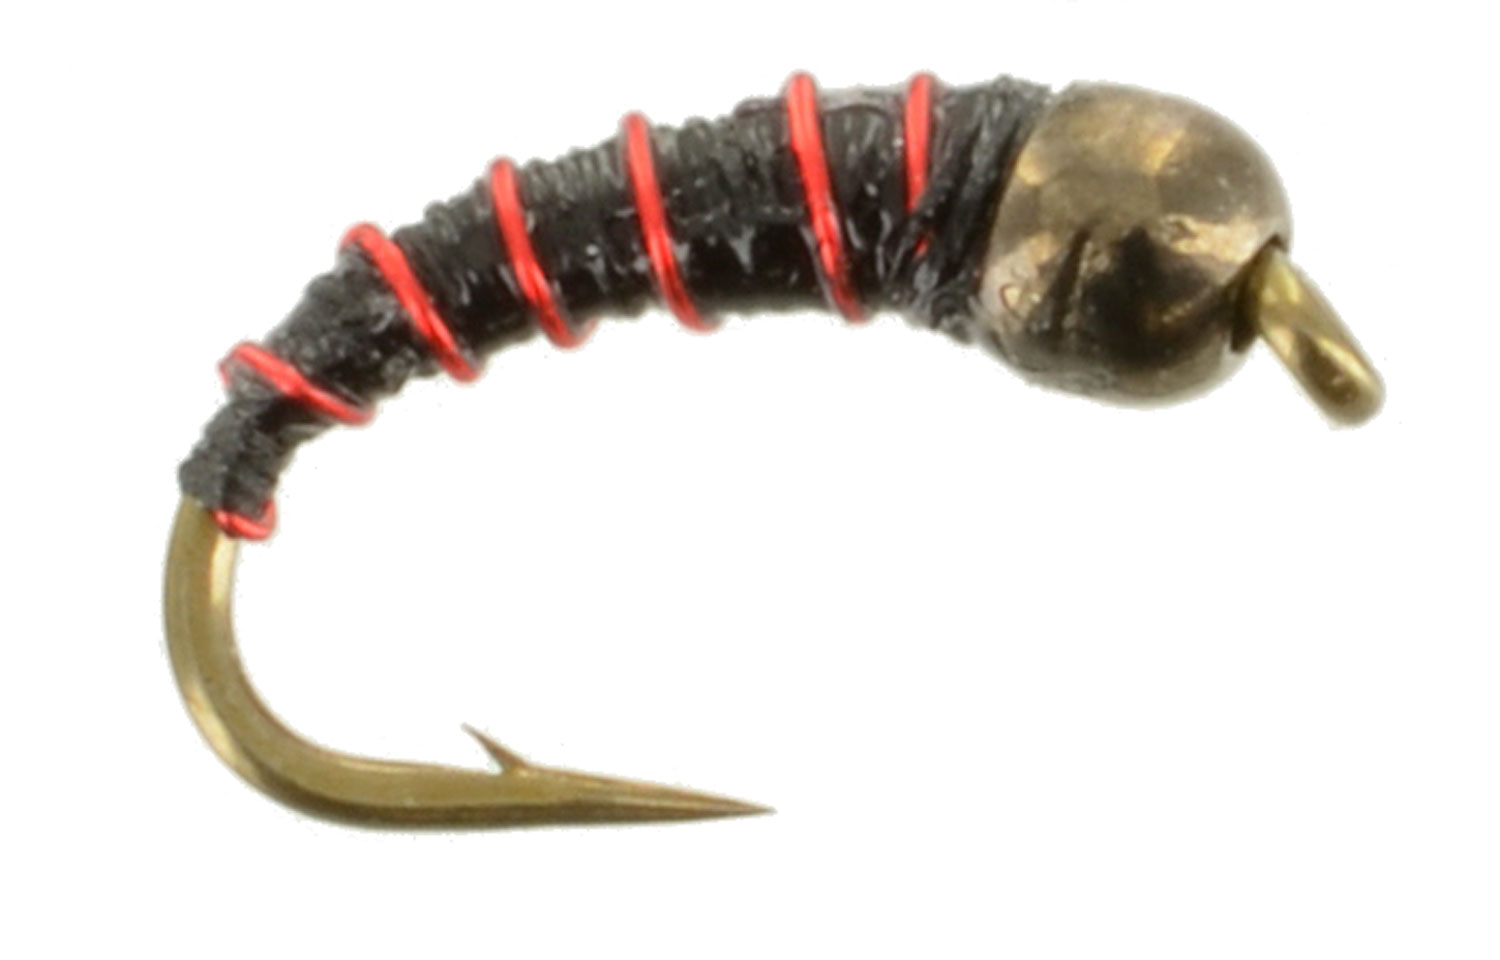 Zebra Midge Black & Red with Tungsten Bead, Fly Fishing Flies For Less